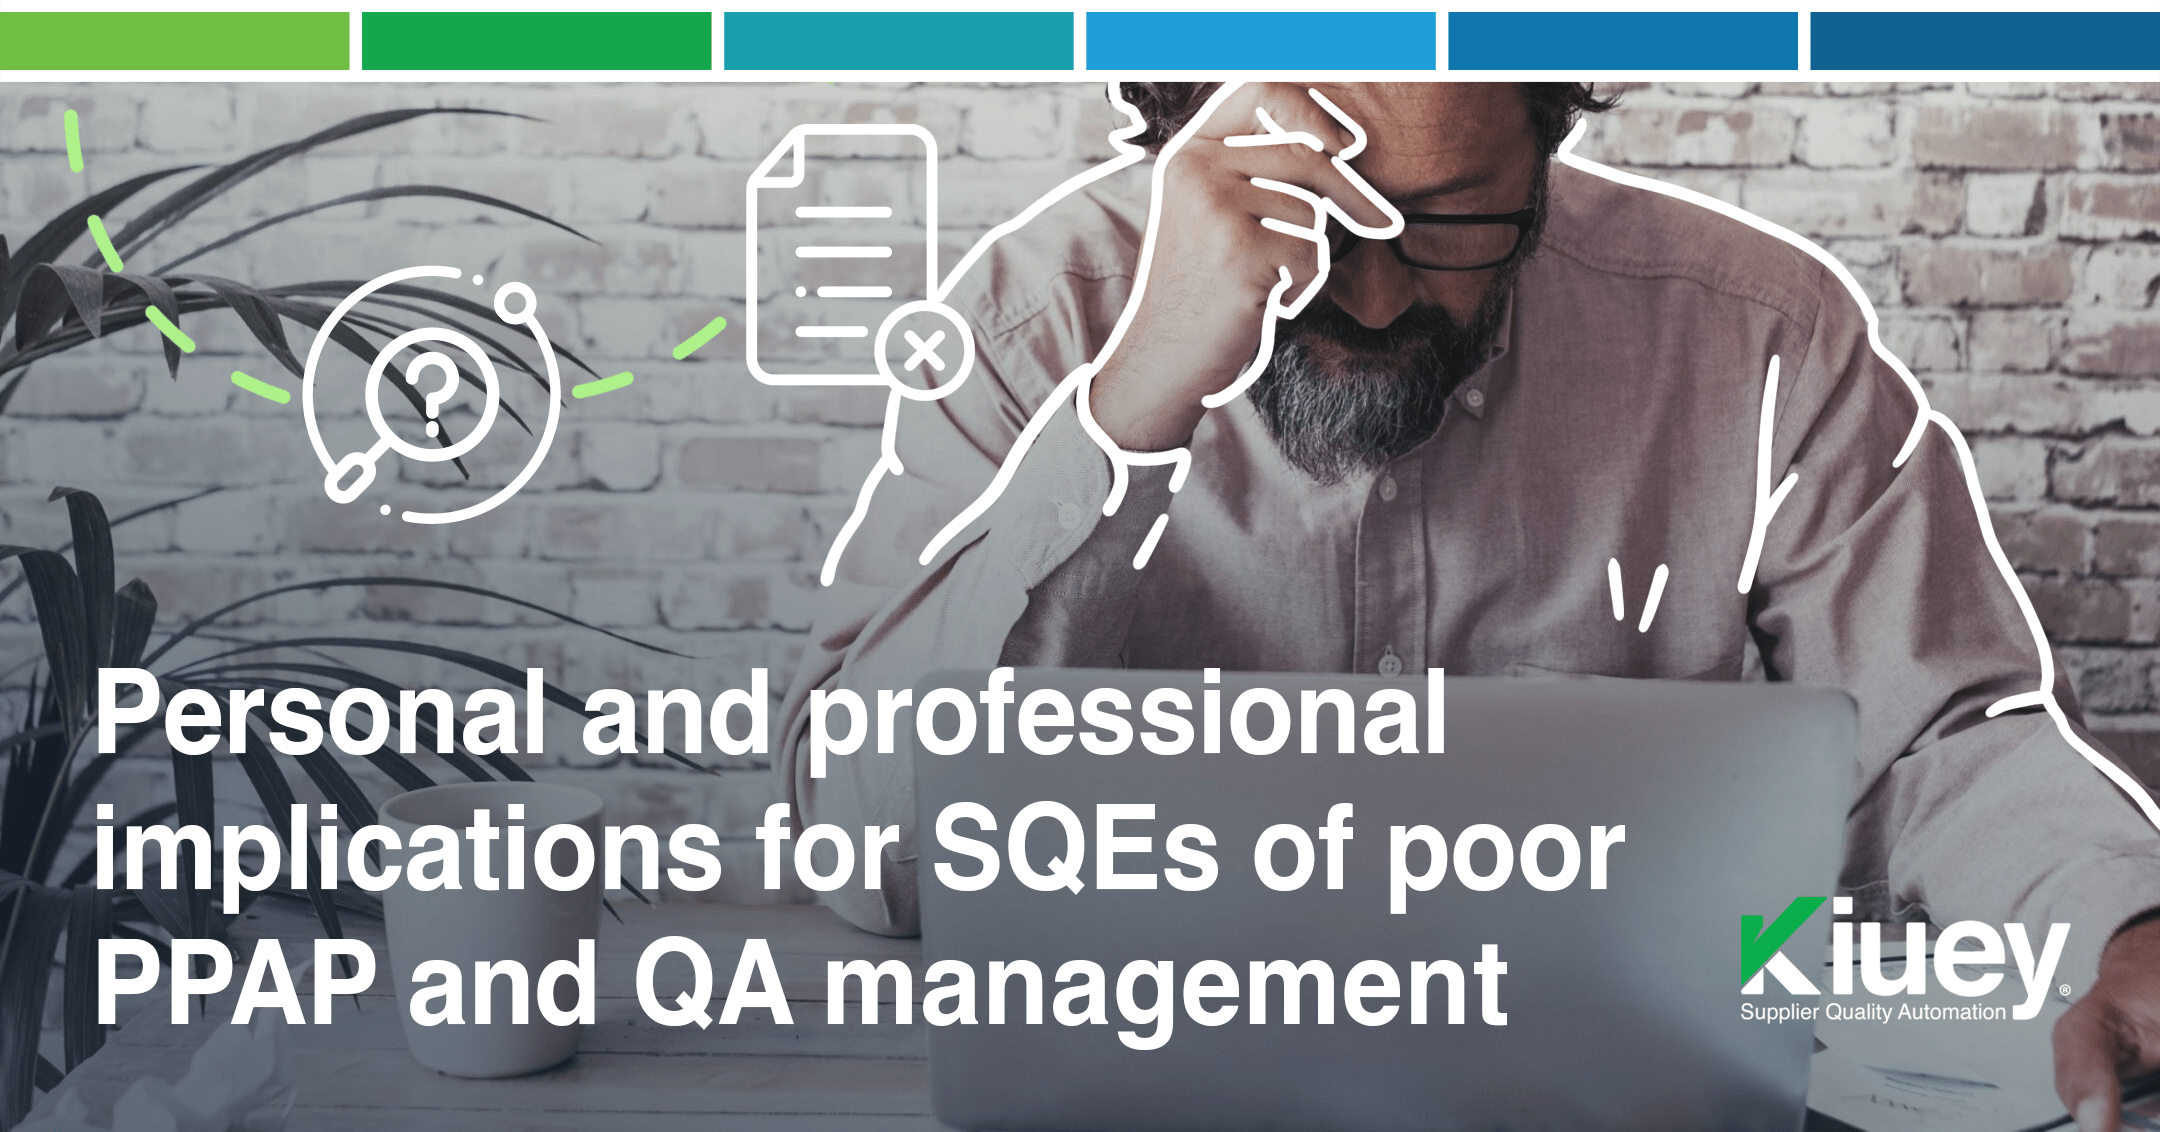 Personal and professional implications for SQEs of poor PPAP and QA management